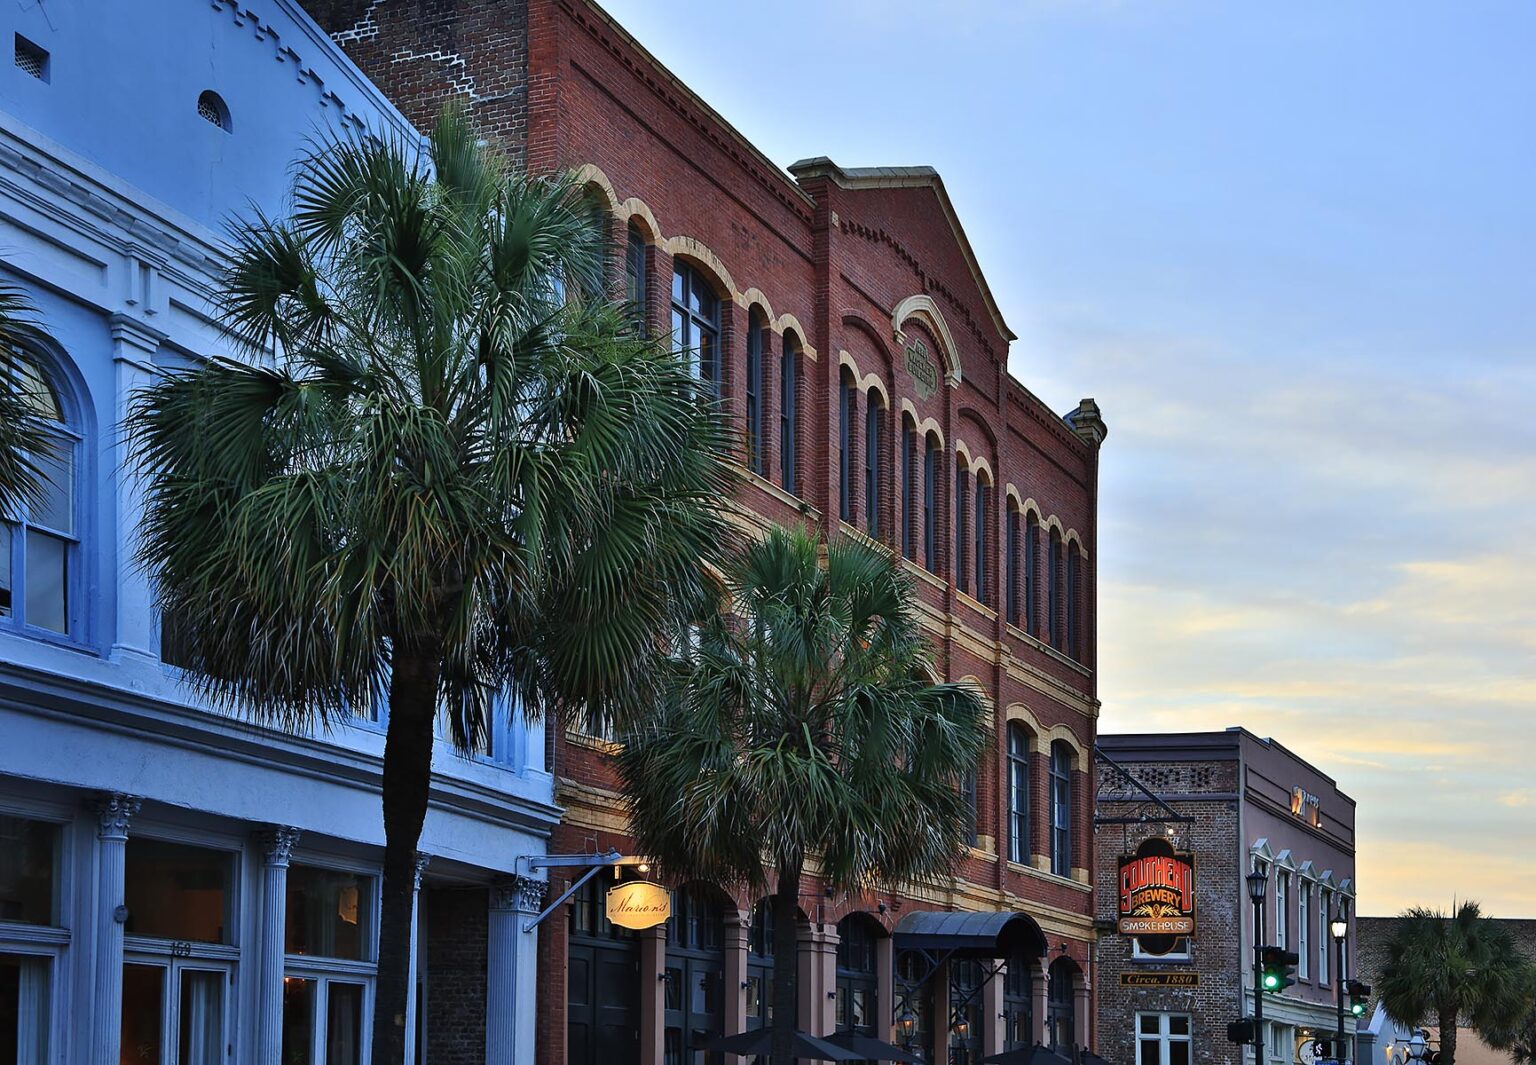 Store fronts in the historical section of CHARLESTON, SOUTH CAROLINA